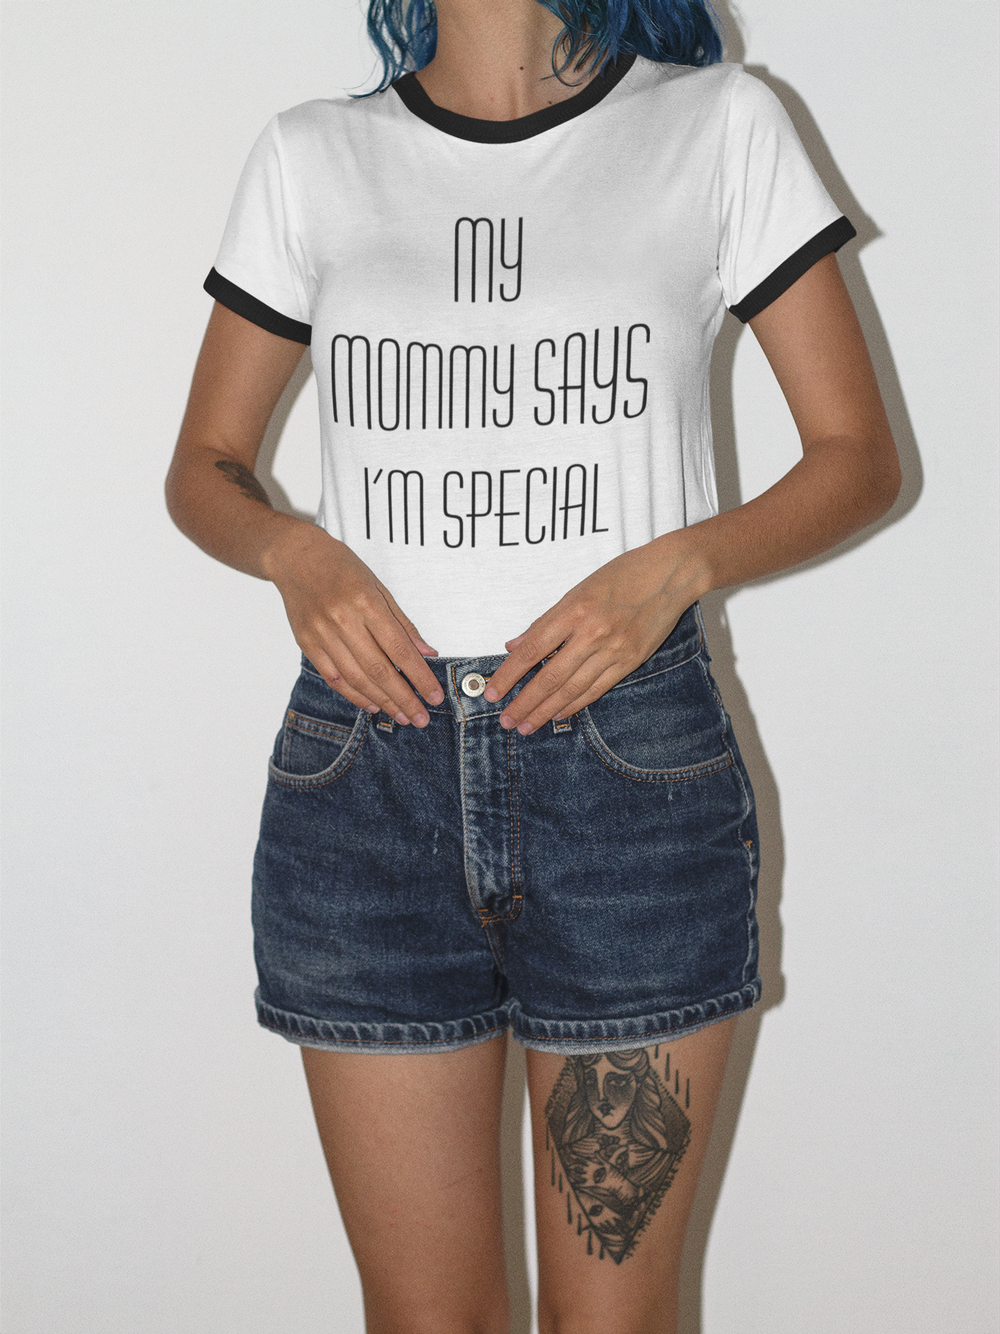 My Mommy Says I'm Special | Men's Ringer T-Shirt OniTakai